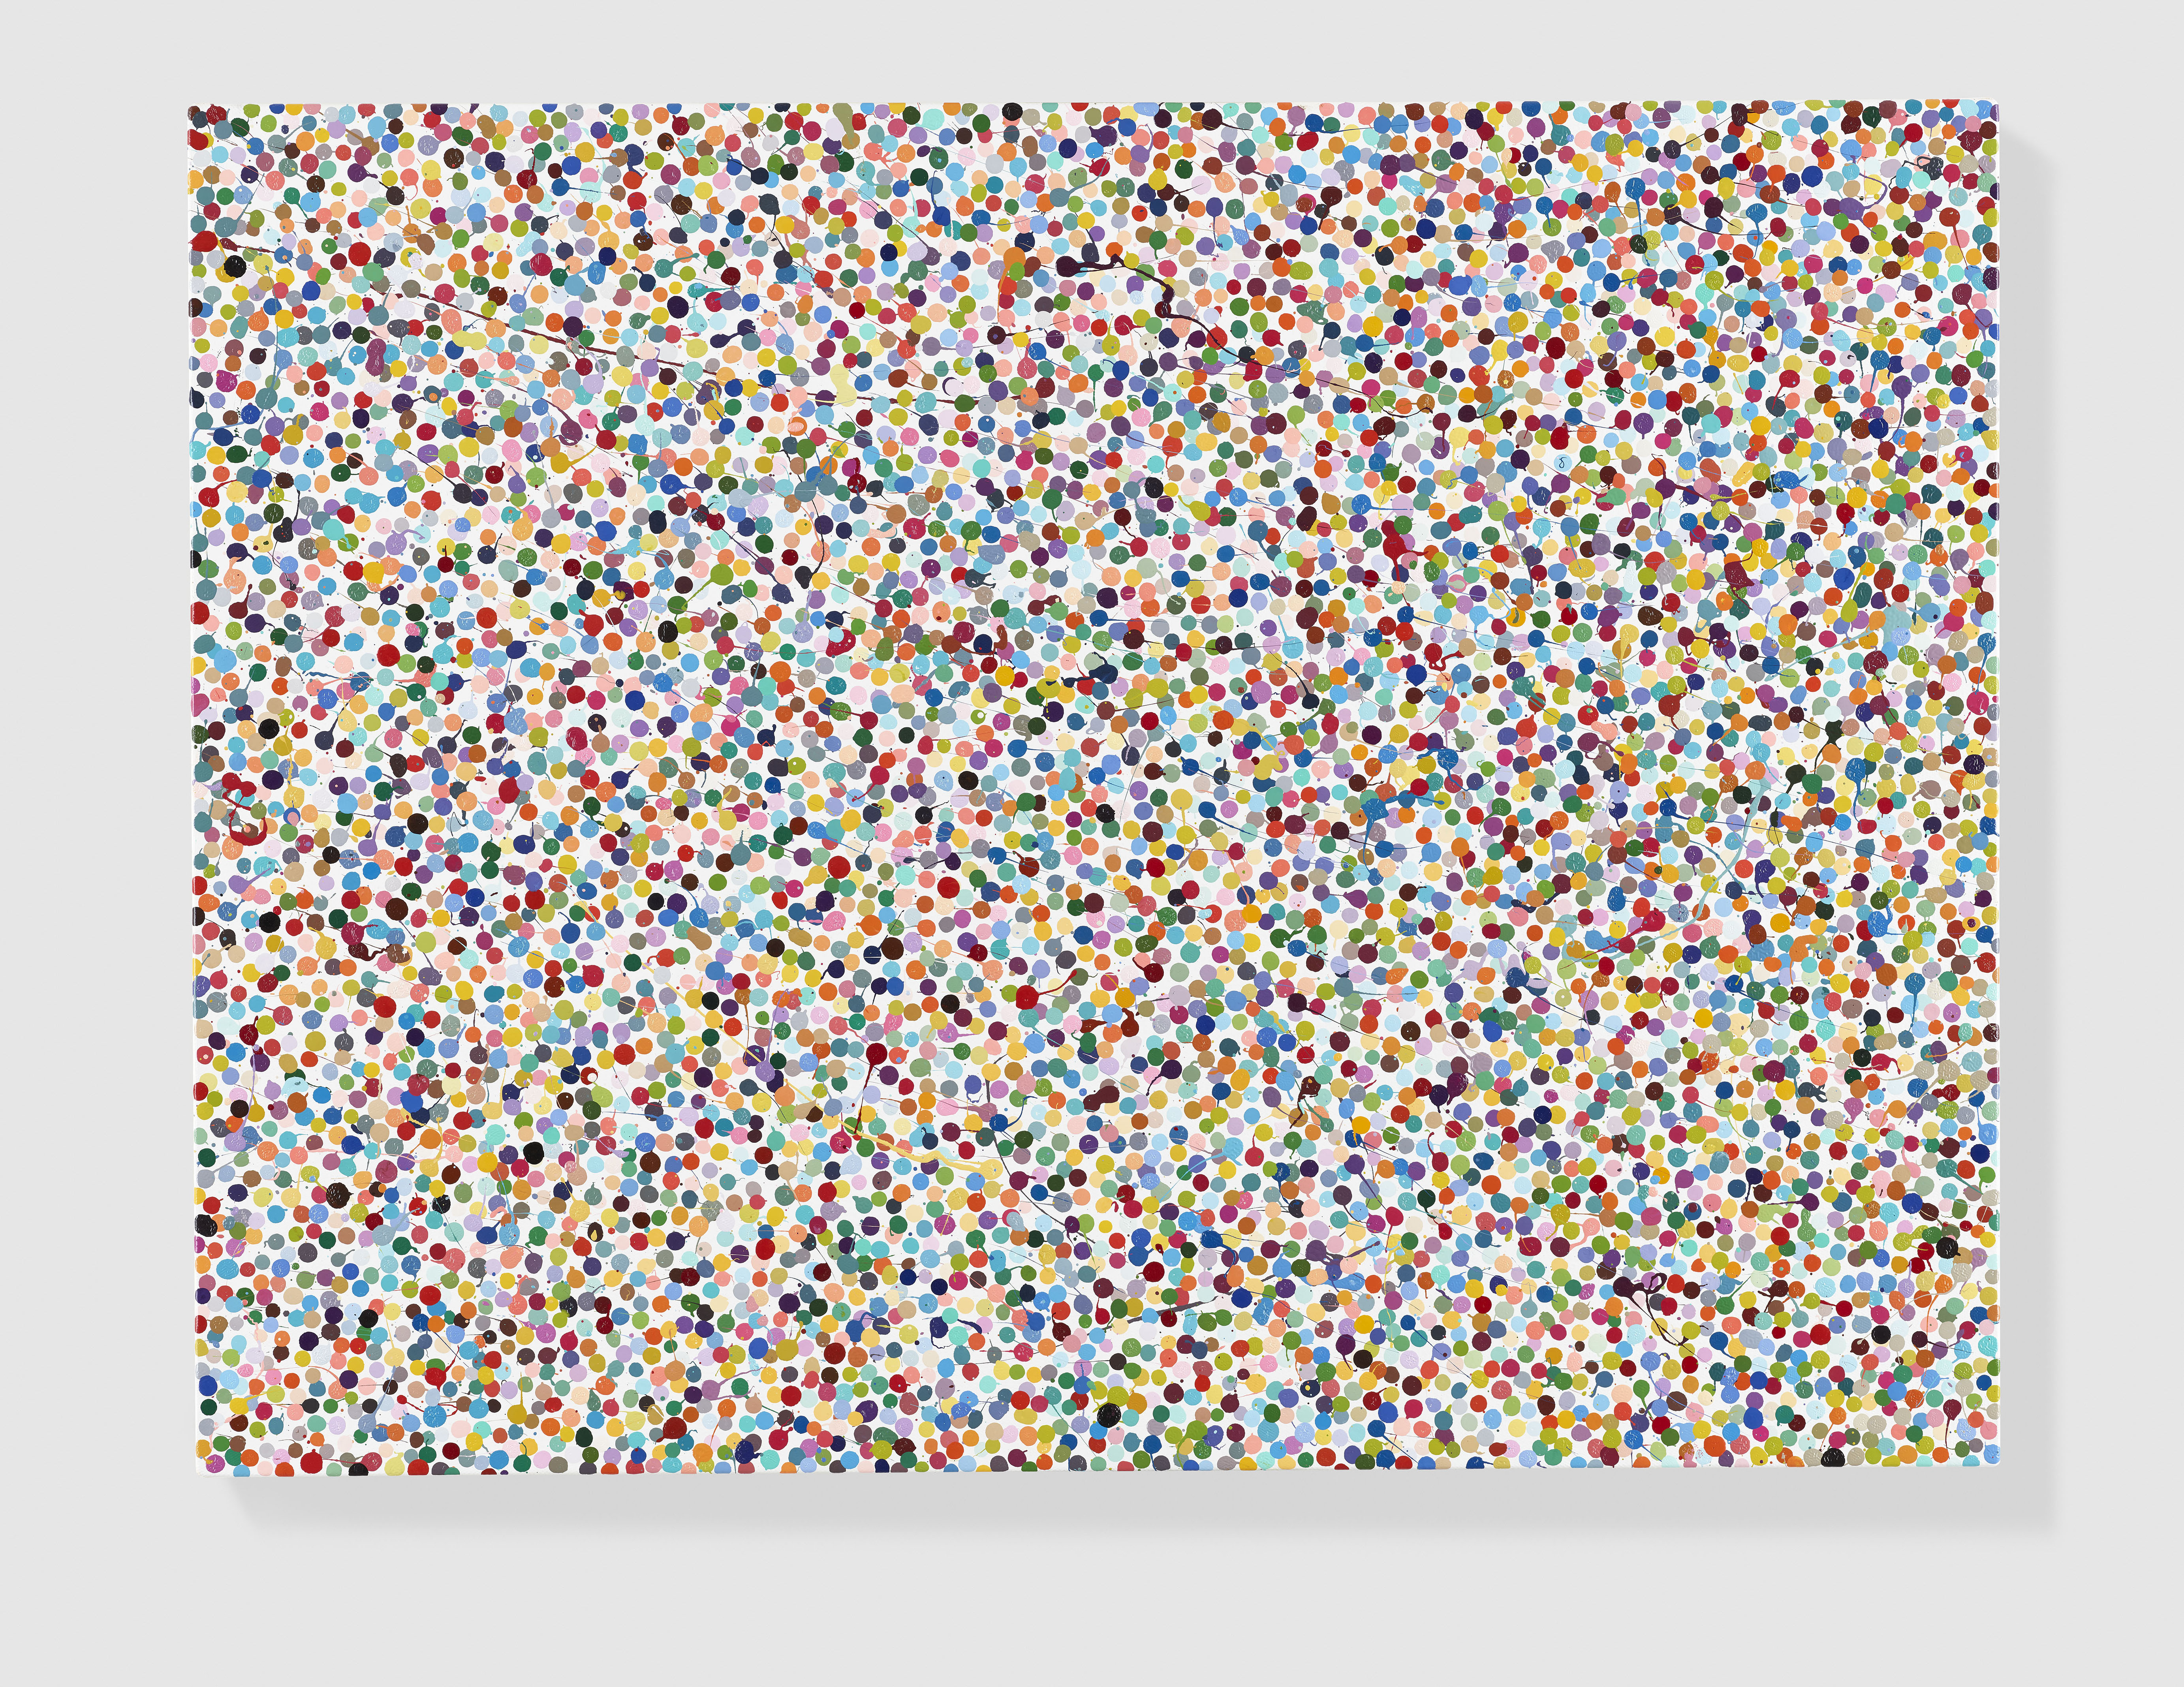 Flesh Tint (2016) Household gloss on canvas 610 x 813 mm © Damien Hirst and Science Ltd. All rights reserved, DACS 2017 Photographed by Prudence Cuming Associates Ltd